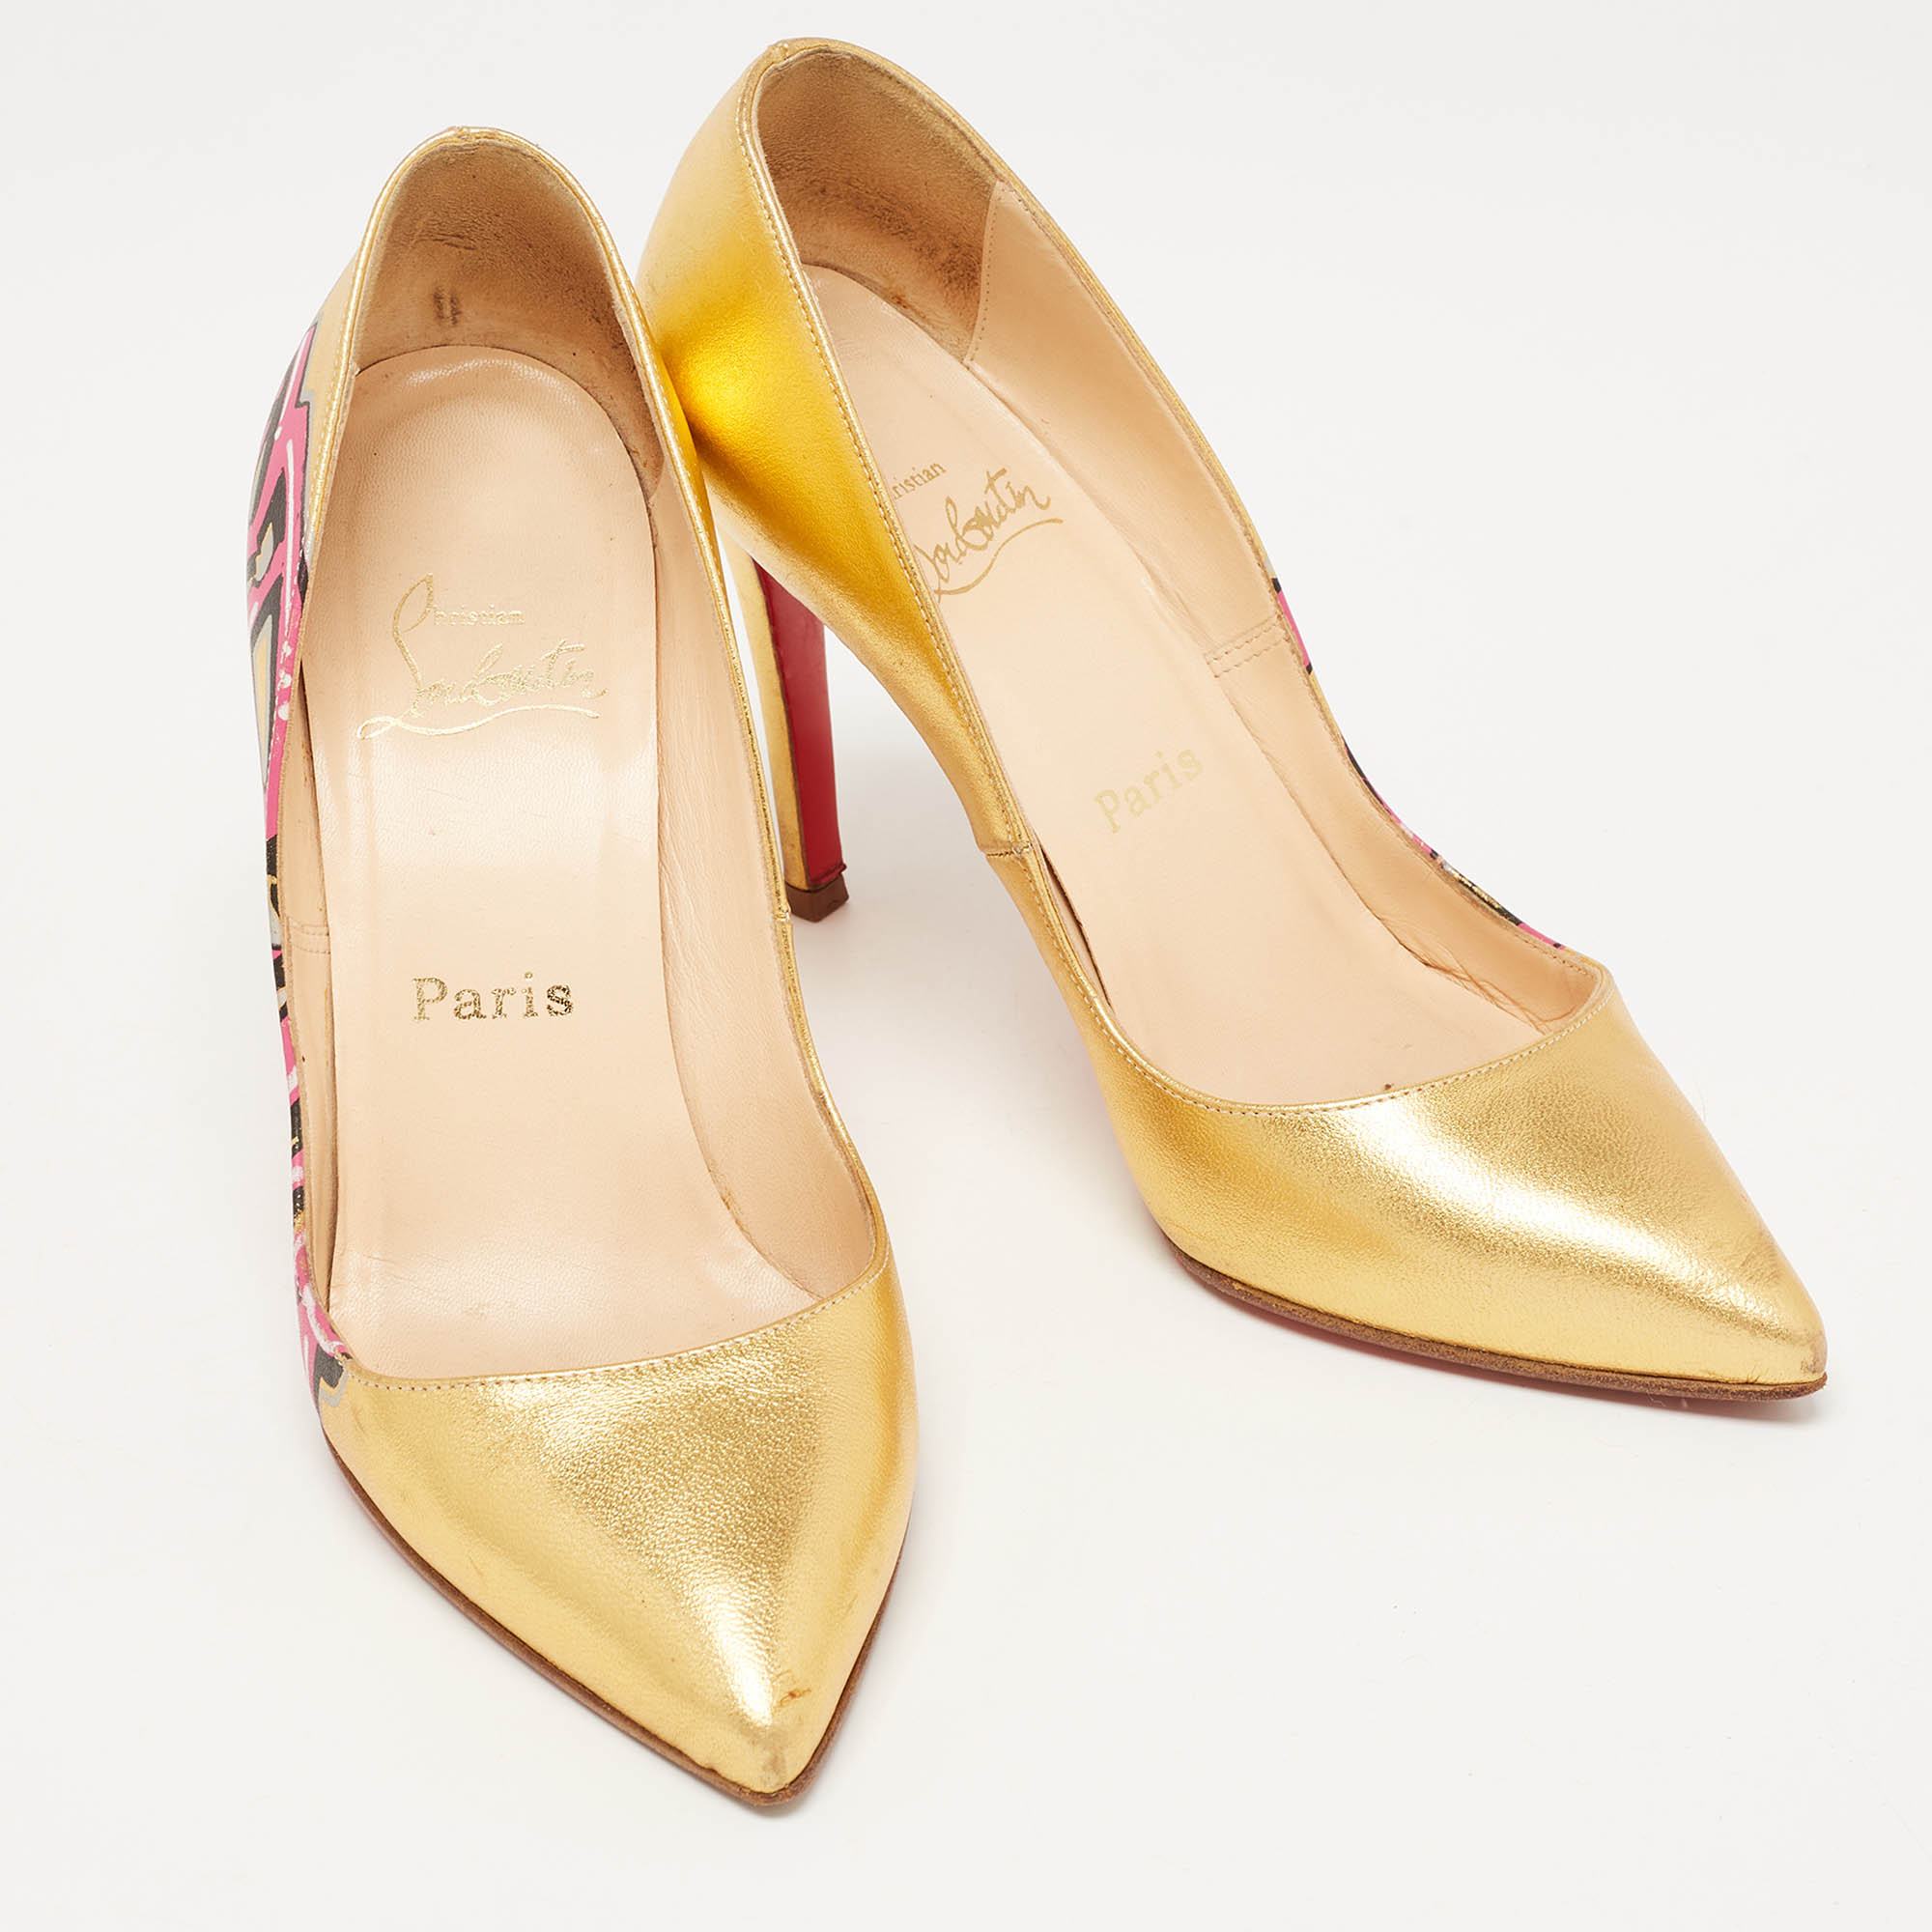 Christian Louboutin Gold Leather Pigalle Graffiti Pumps Size 37.5